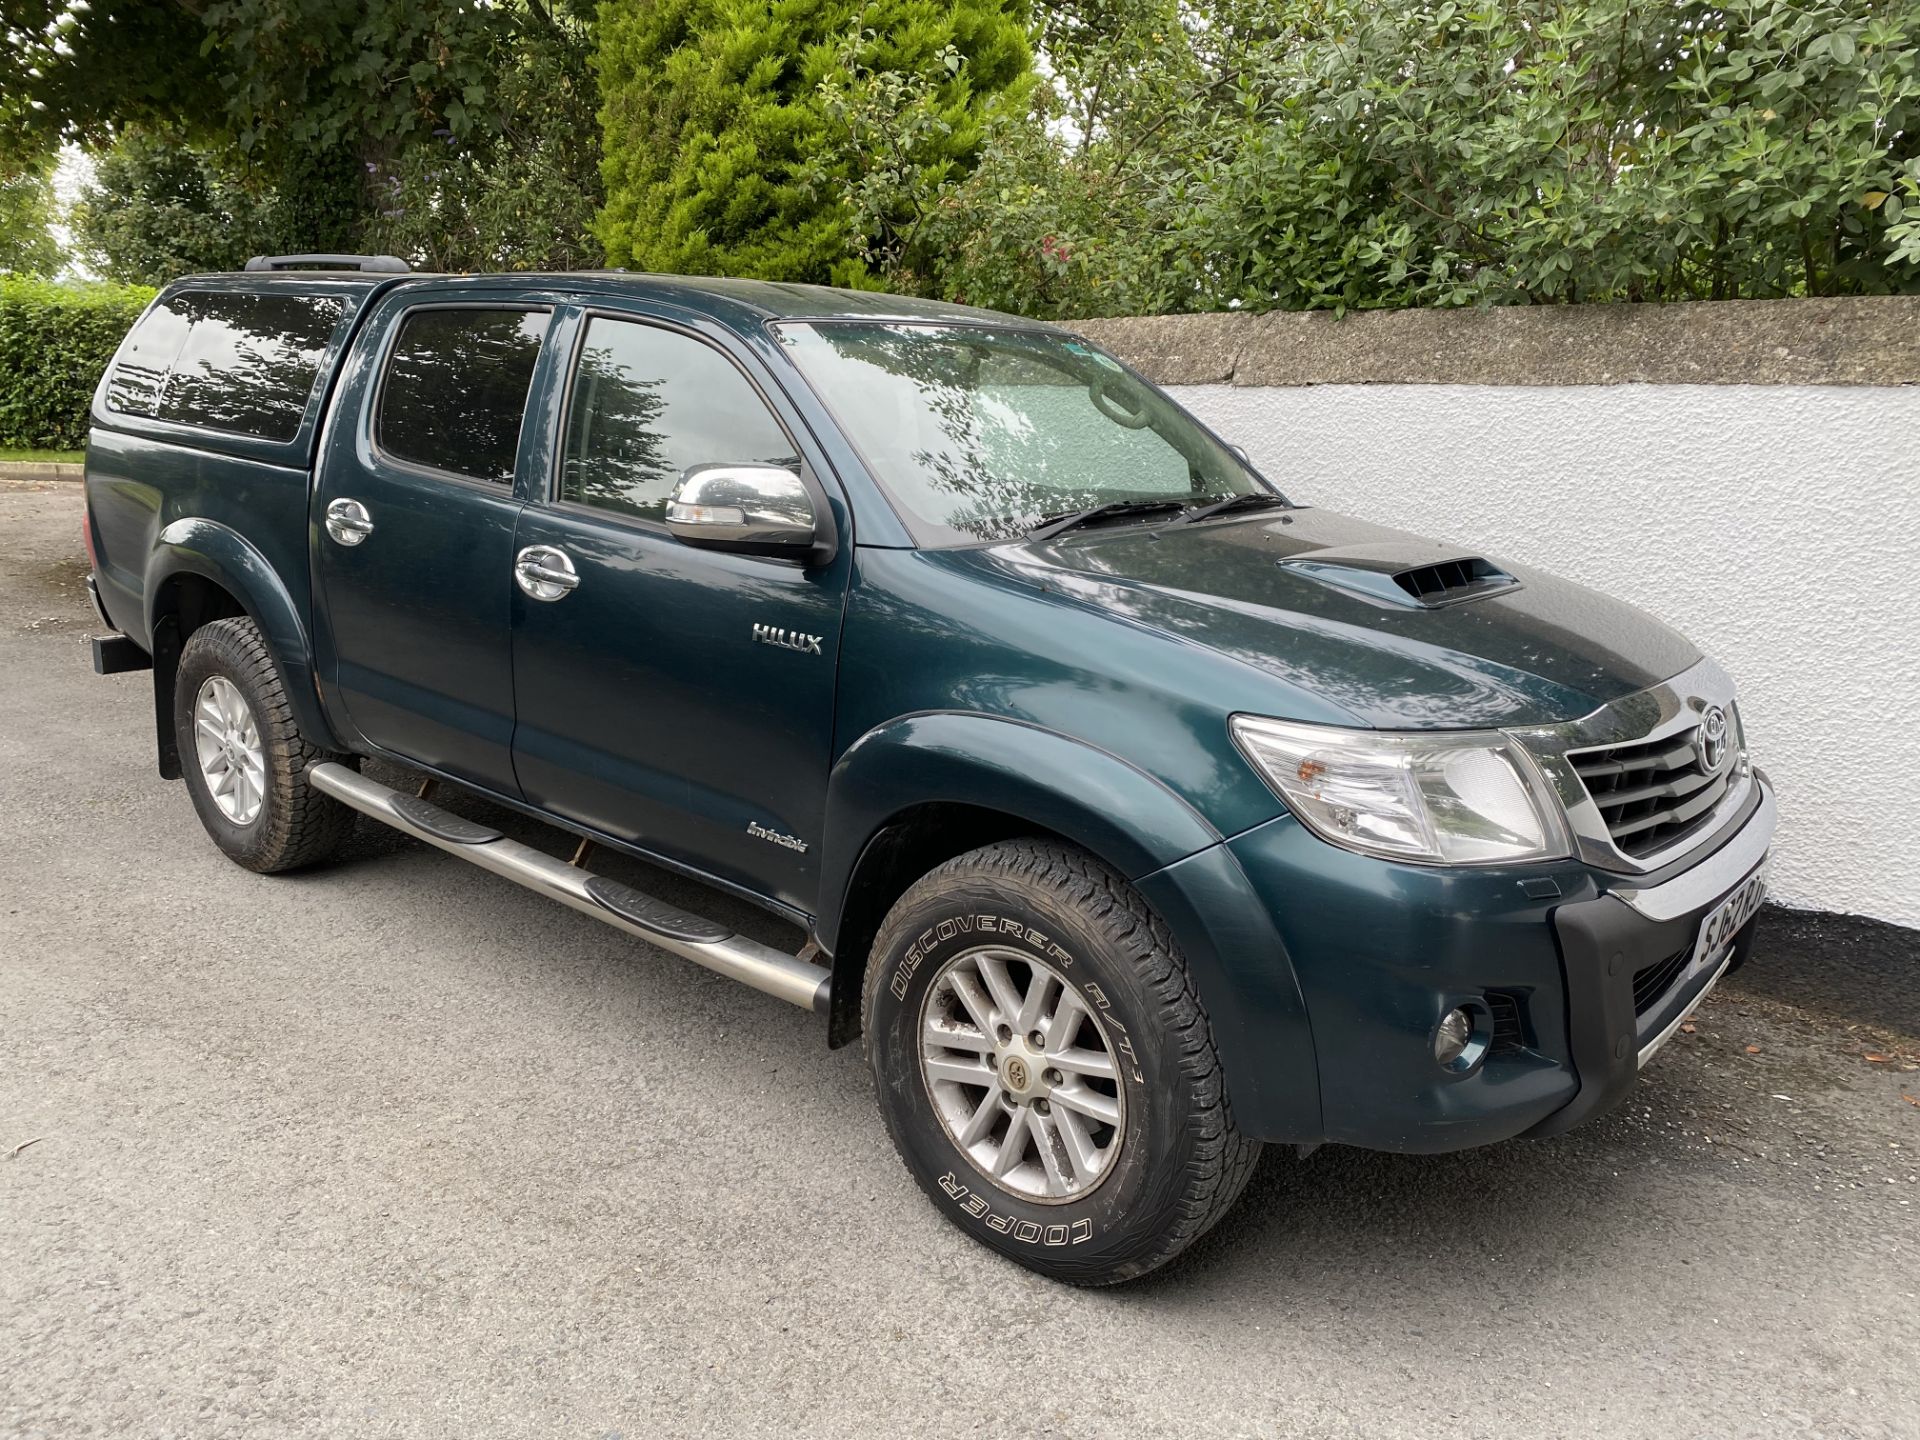 2012 TOYOTA HILUX INVINCIBLE. JEEP.LOCATION NORTHERN IRELAND.